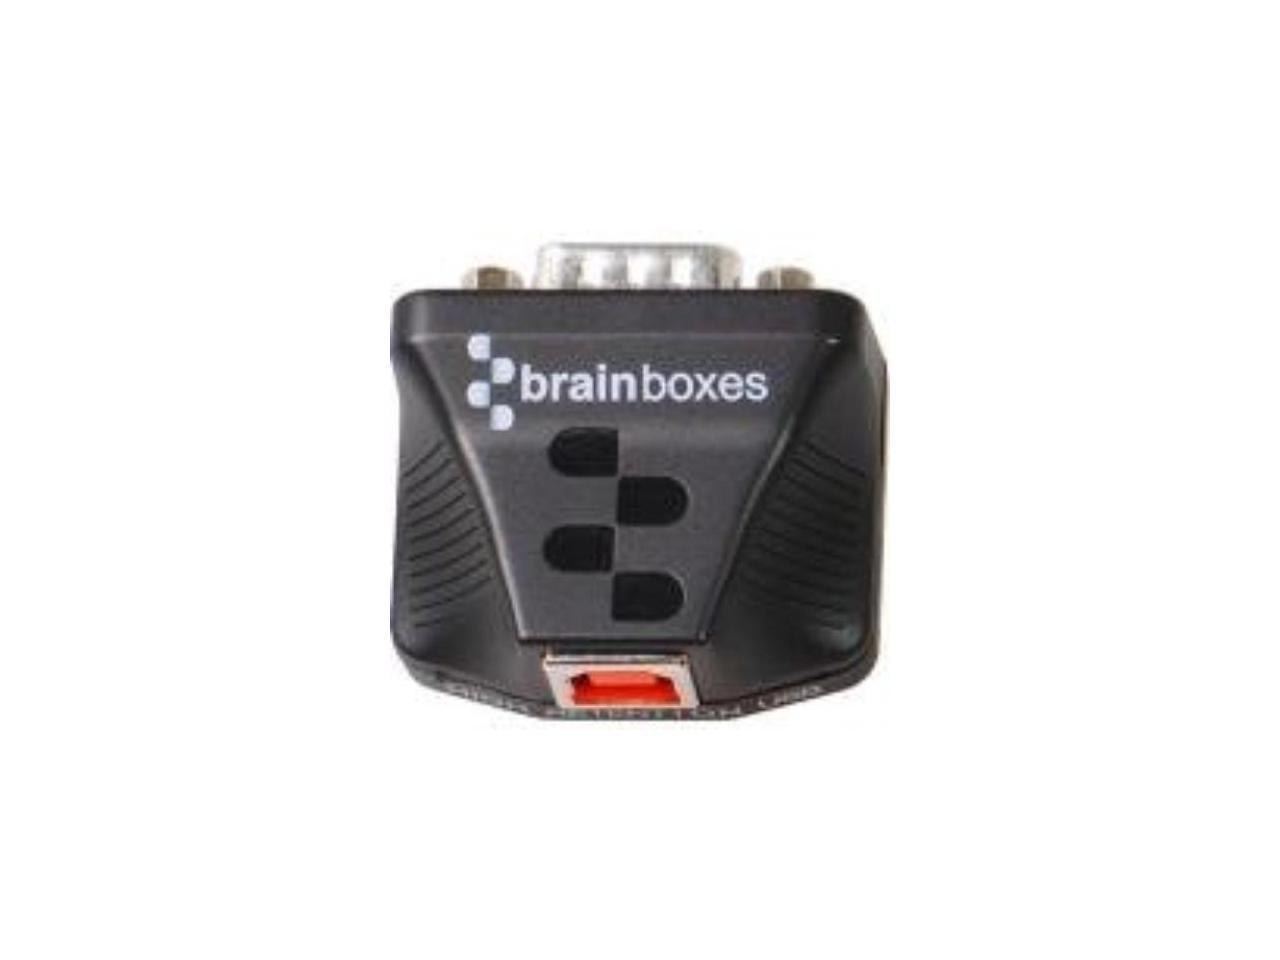 Brainboxes Small Profile Usb Serial Device